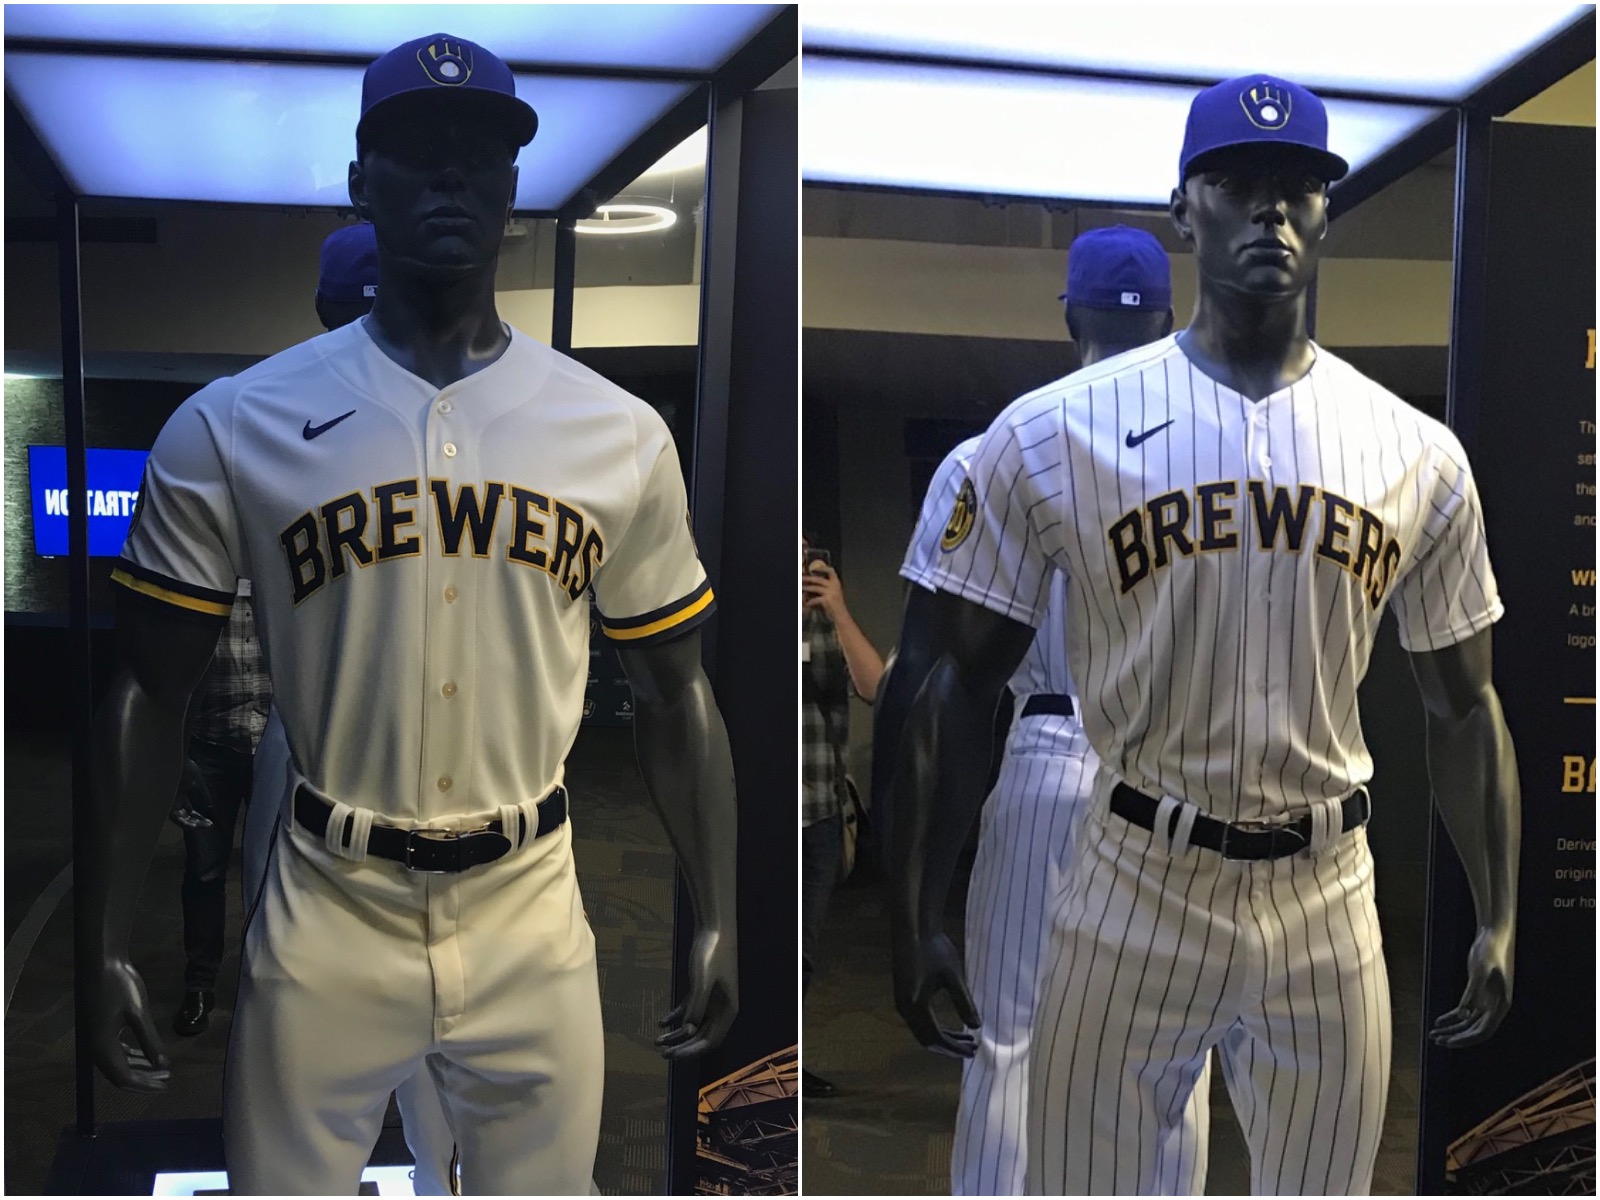 1980s brewers uniforms